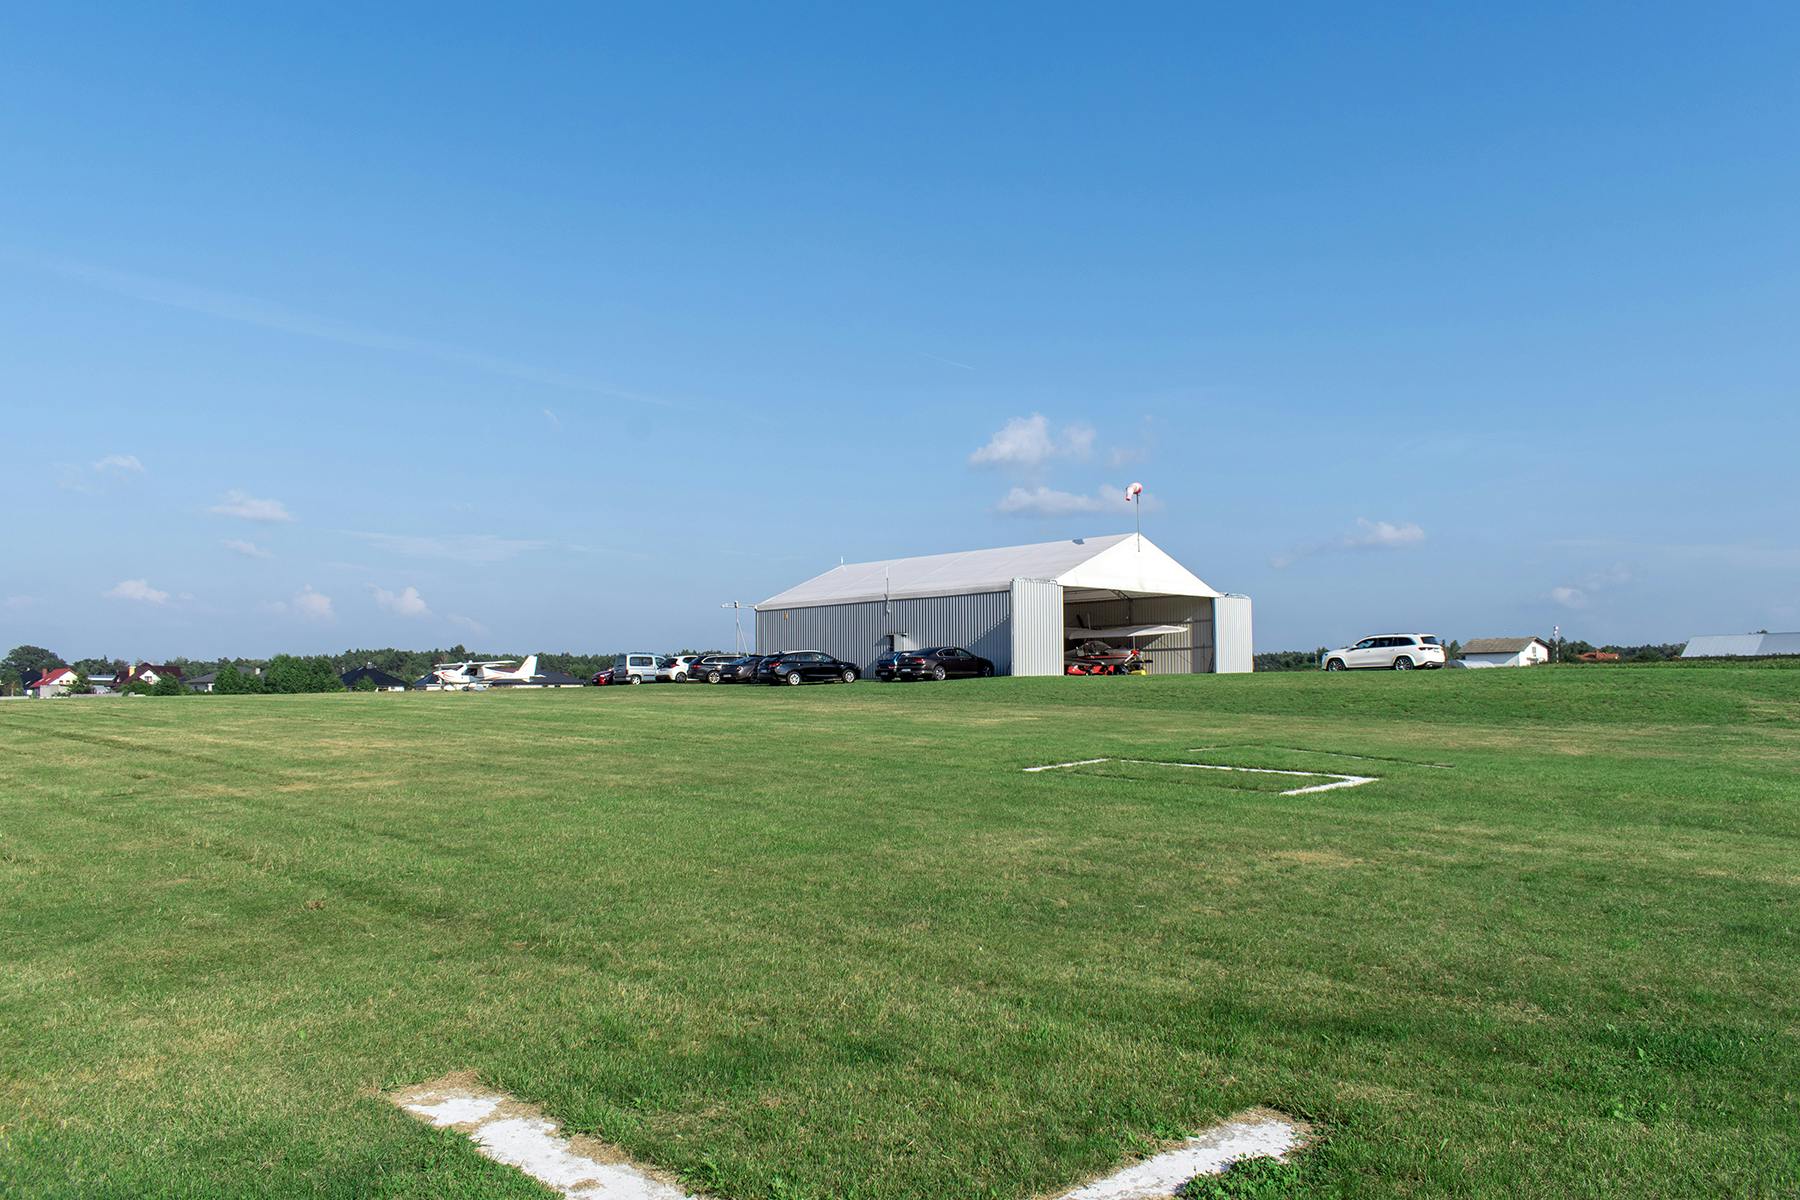 Chojeński, 2022. The new hangar for airplanes and ultralights next to the runway.